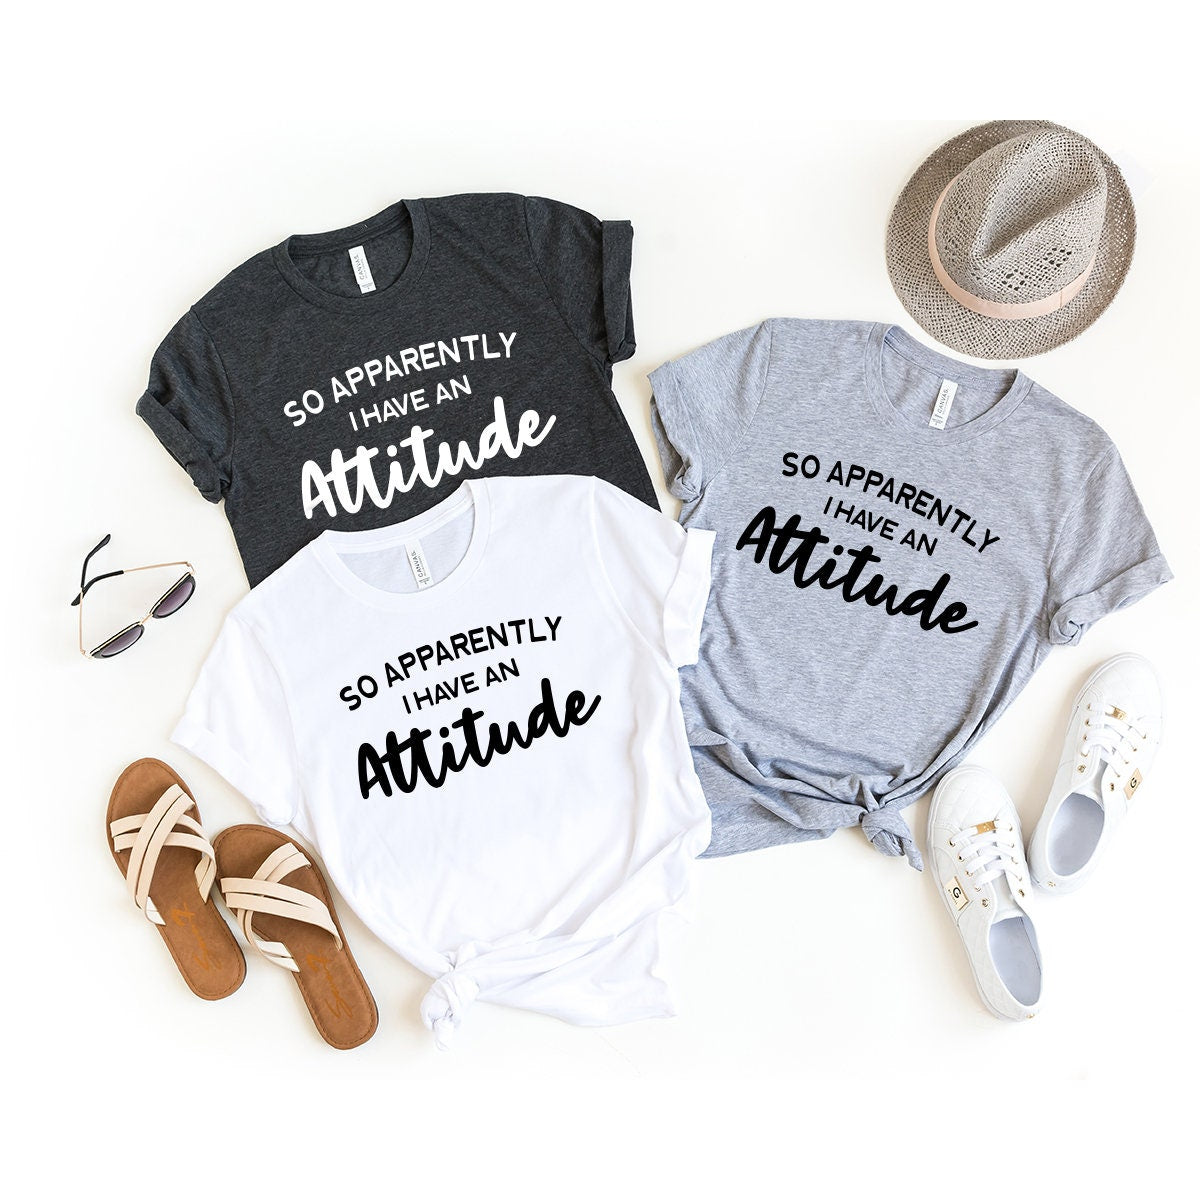 Sarcastic Women T-Shirt,  Funny Quote Shirt, So Apparently I Have An Attitude Shirt, Introvert Shirt, Women Life Tee, Funny Tee - Fastdeliverytees.com